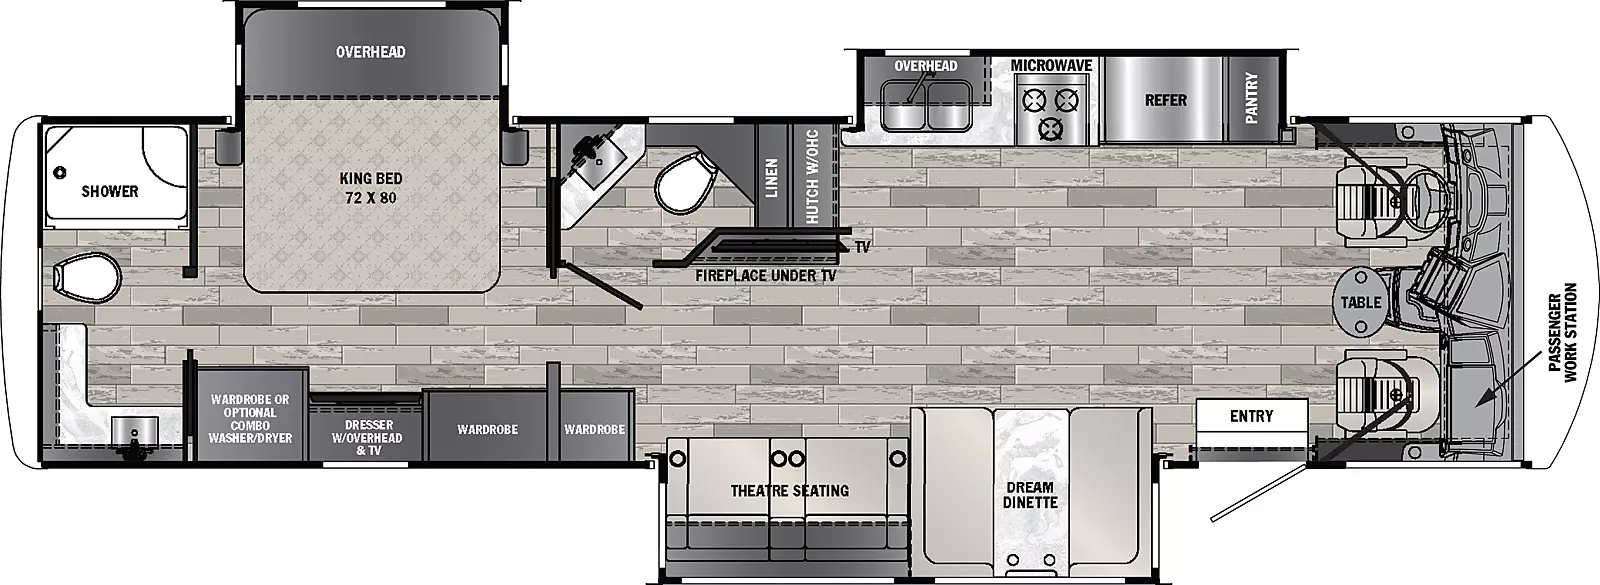 The 34H5 is a 3 slide out floorplan; 2 off-door side, 1 door side.   Interior front to back; Cab with table, passenger work station.  Off-door side slide out; kitchen with pantry, refrigerator, microwave, overhead.  Off-door side; hutch with overhead cabinet, TV, Fireplace under TV, Lav with linen.  Off-door side 2nd slide out; king bed 72x80, overhead cabinet.  Full bath with shower in rear of coach.  Door side slide out; booth dinette, theater seating.  Door side;  wardrobe, dresser with overhead & TV, Wardrobe optional combo washer/dryer.